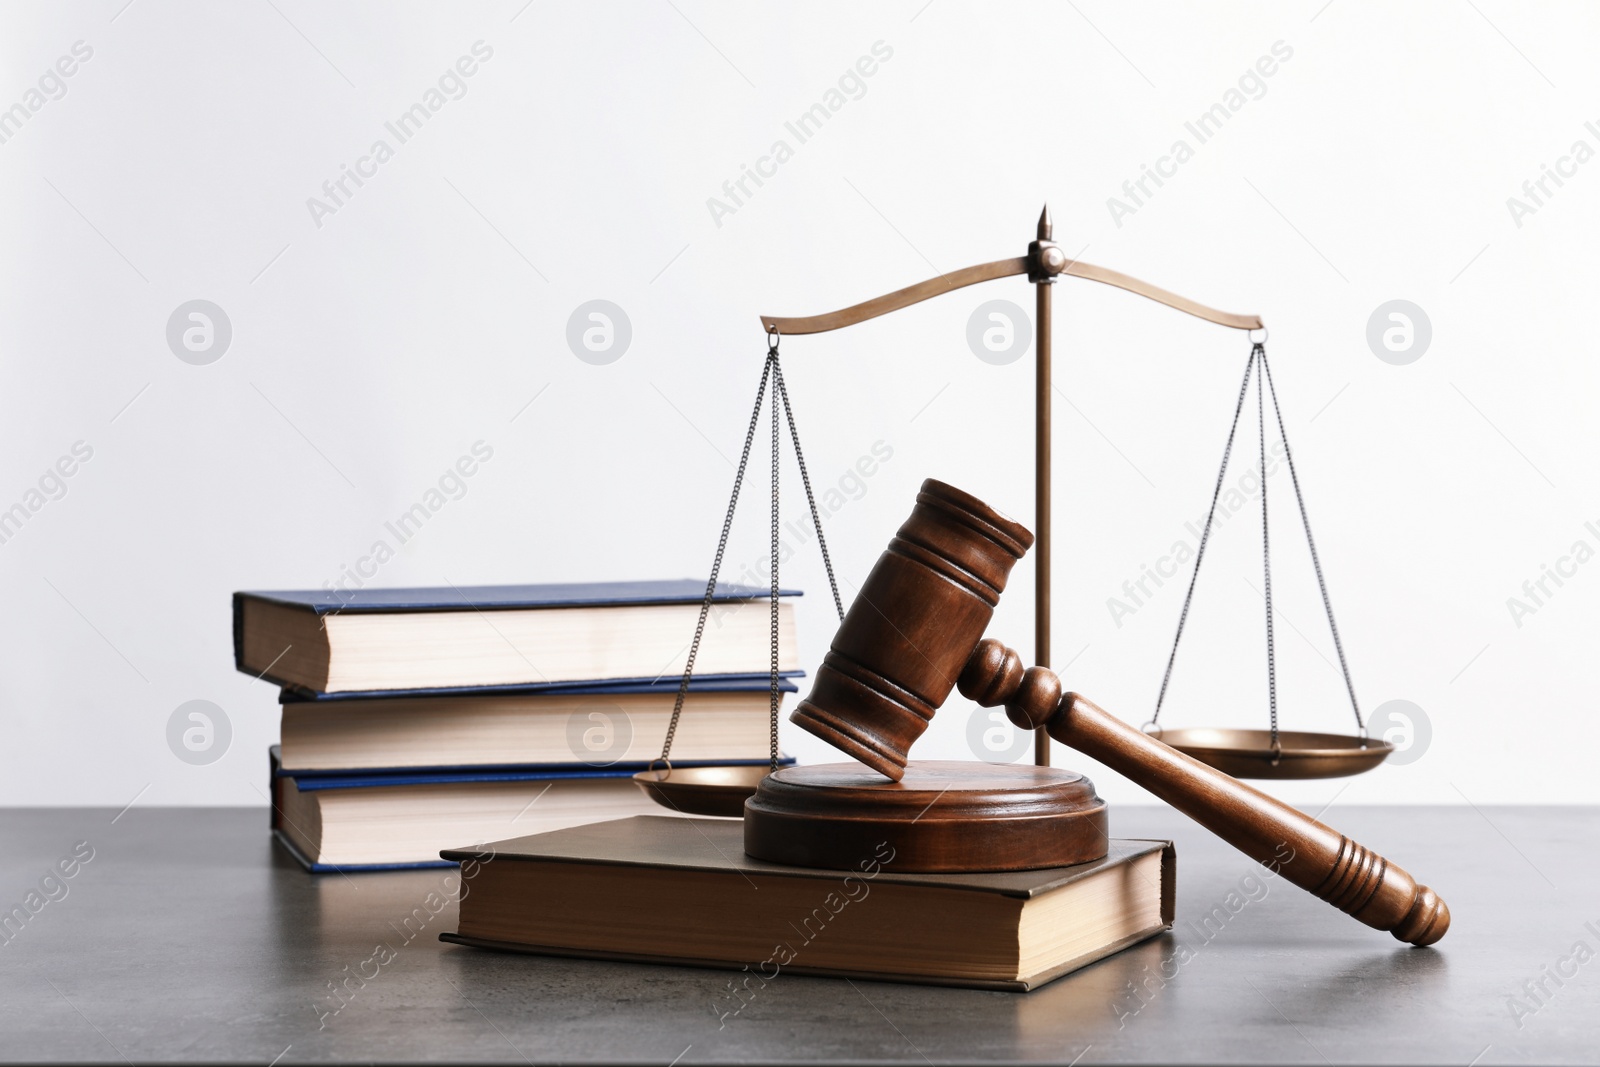 Photo of Wooden gavel, scales of justice and books on table. Law concept